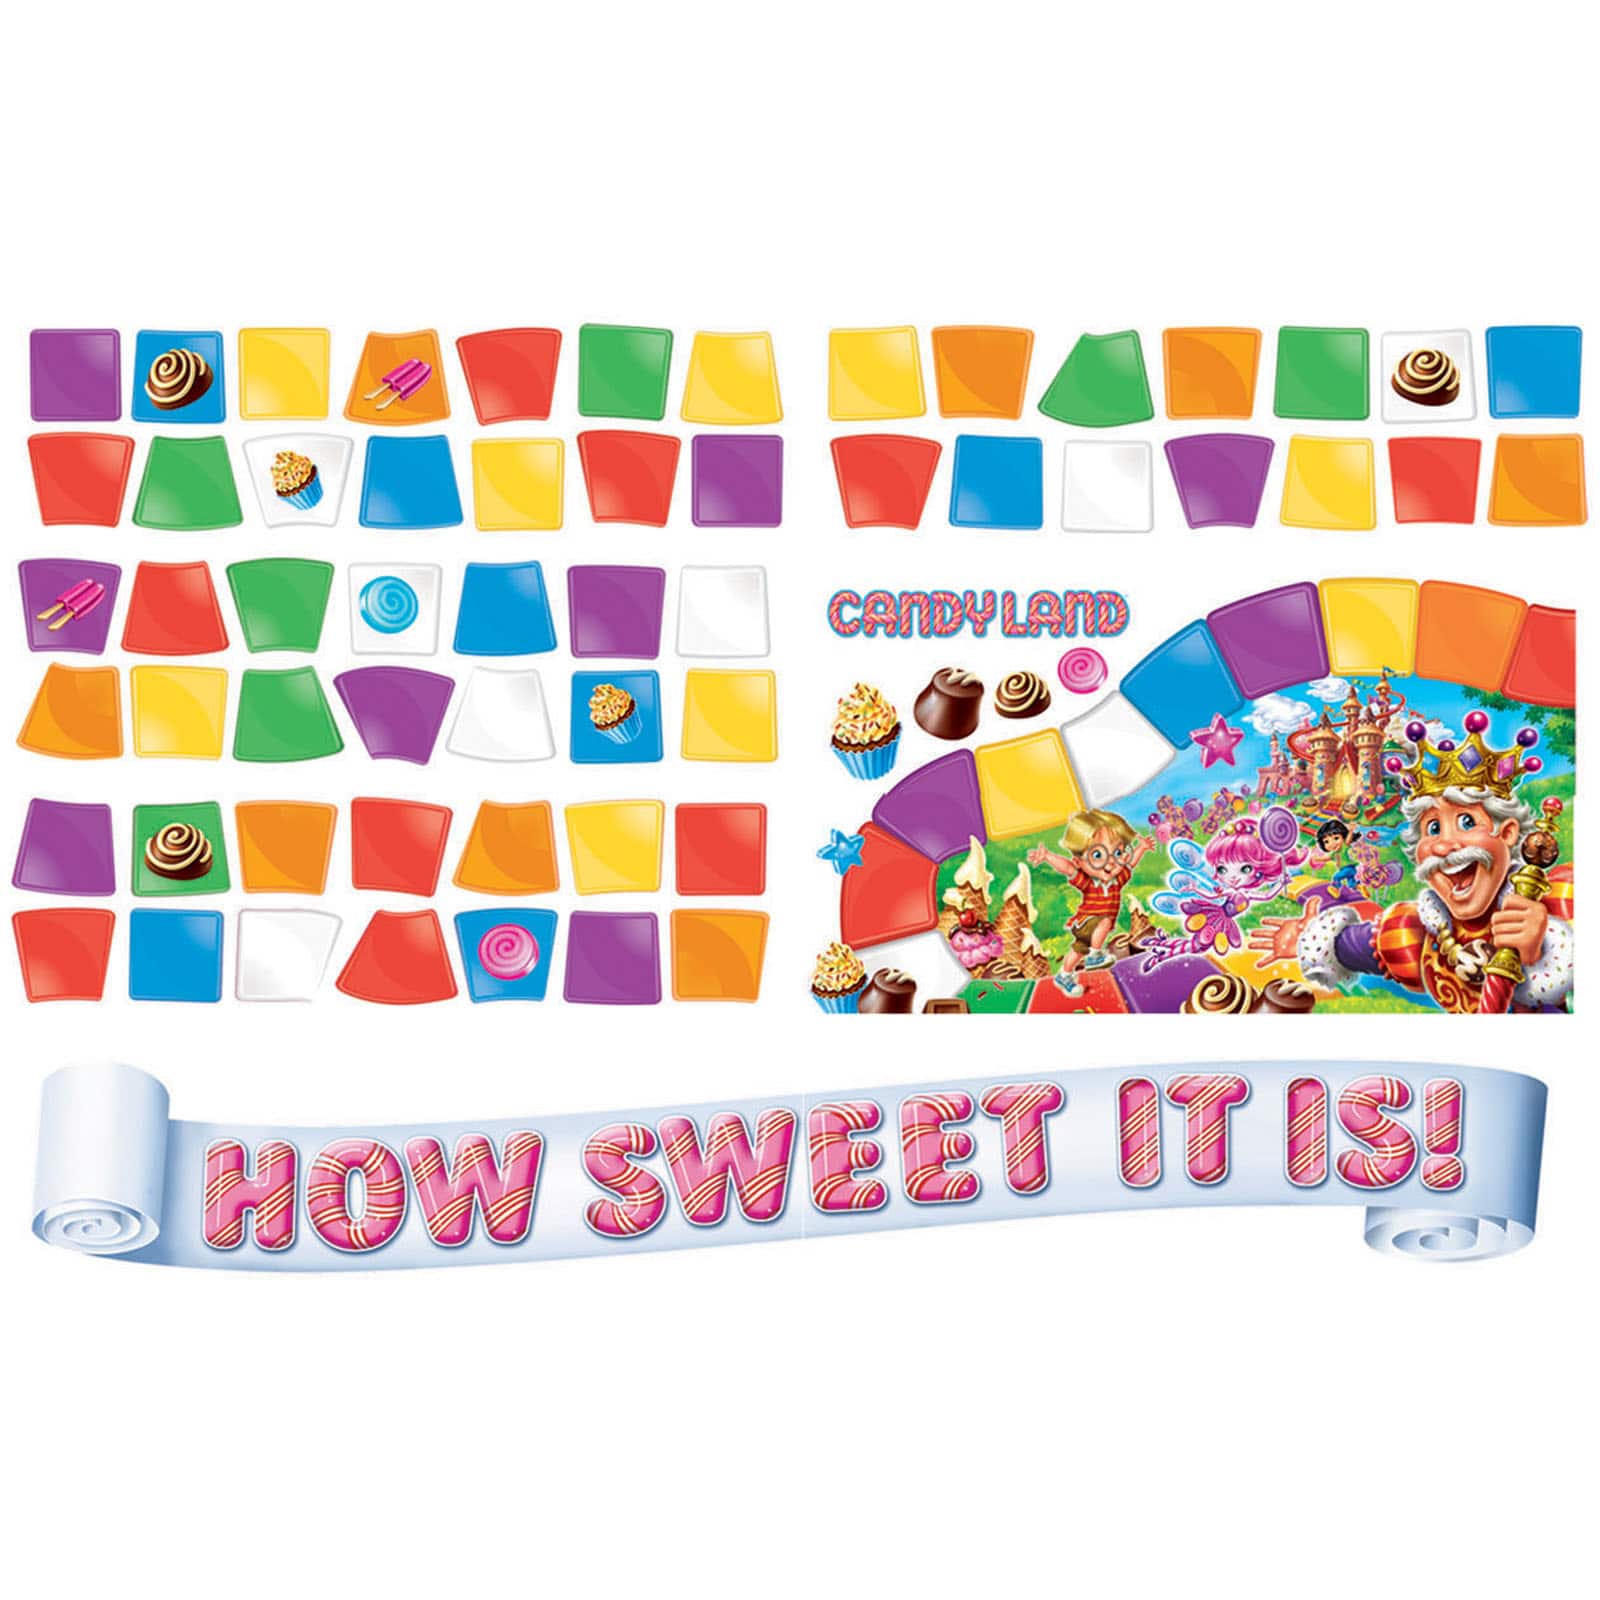 Find The Candy Land How Sweet Mini Bulletin Board Set At Michaels